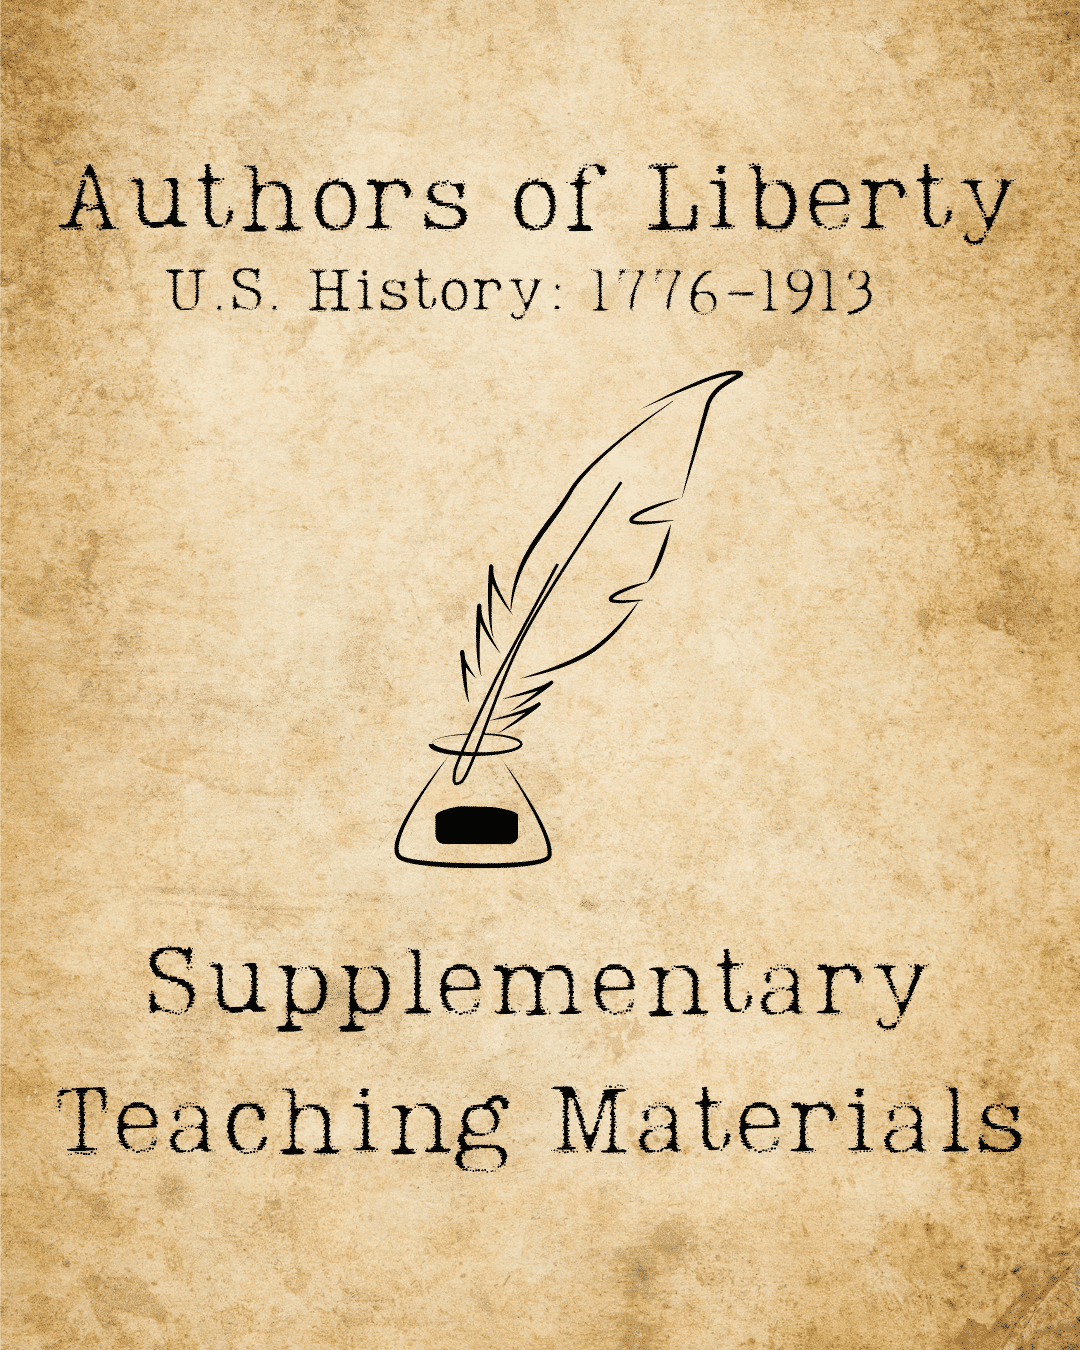 Supplemental Teaching Materials - Authors of Liberty